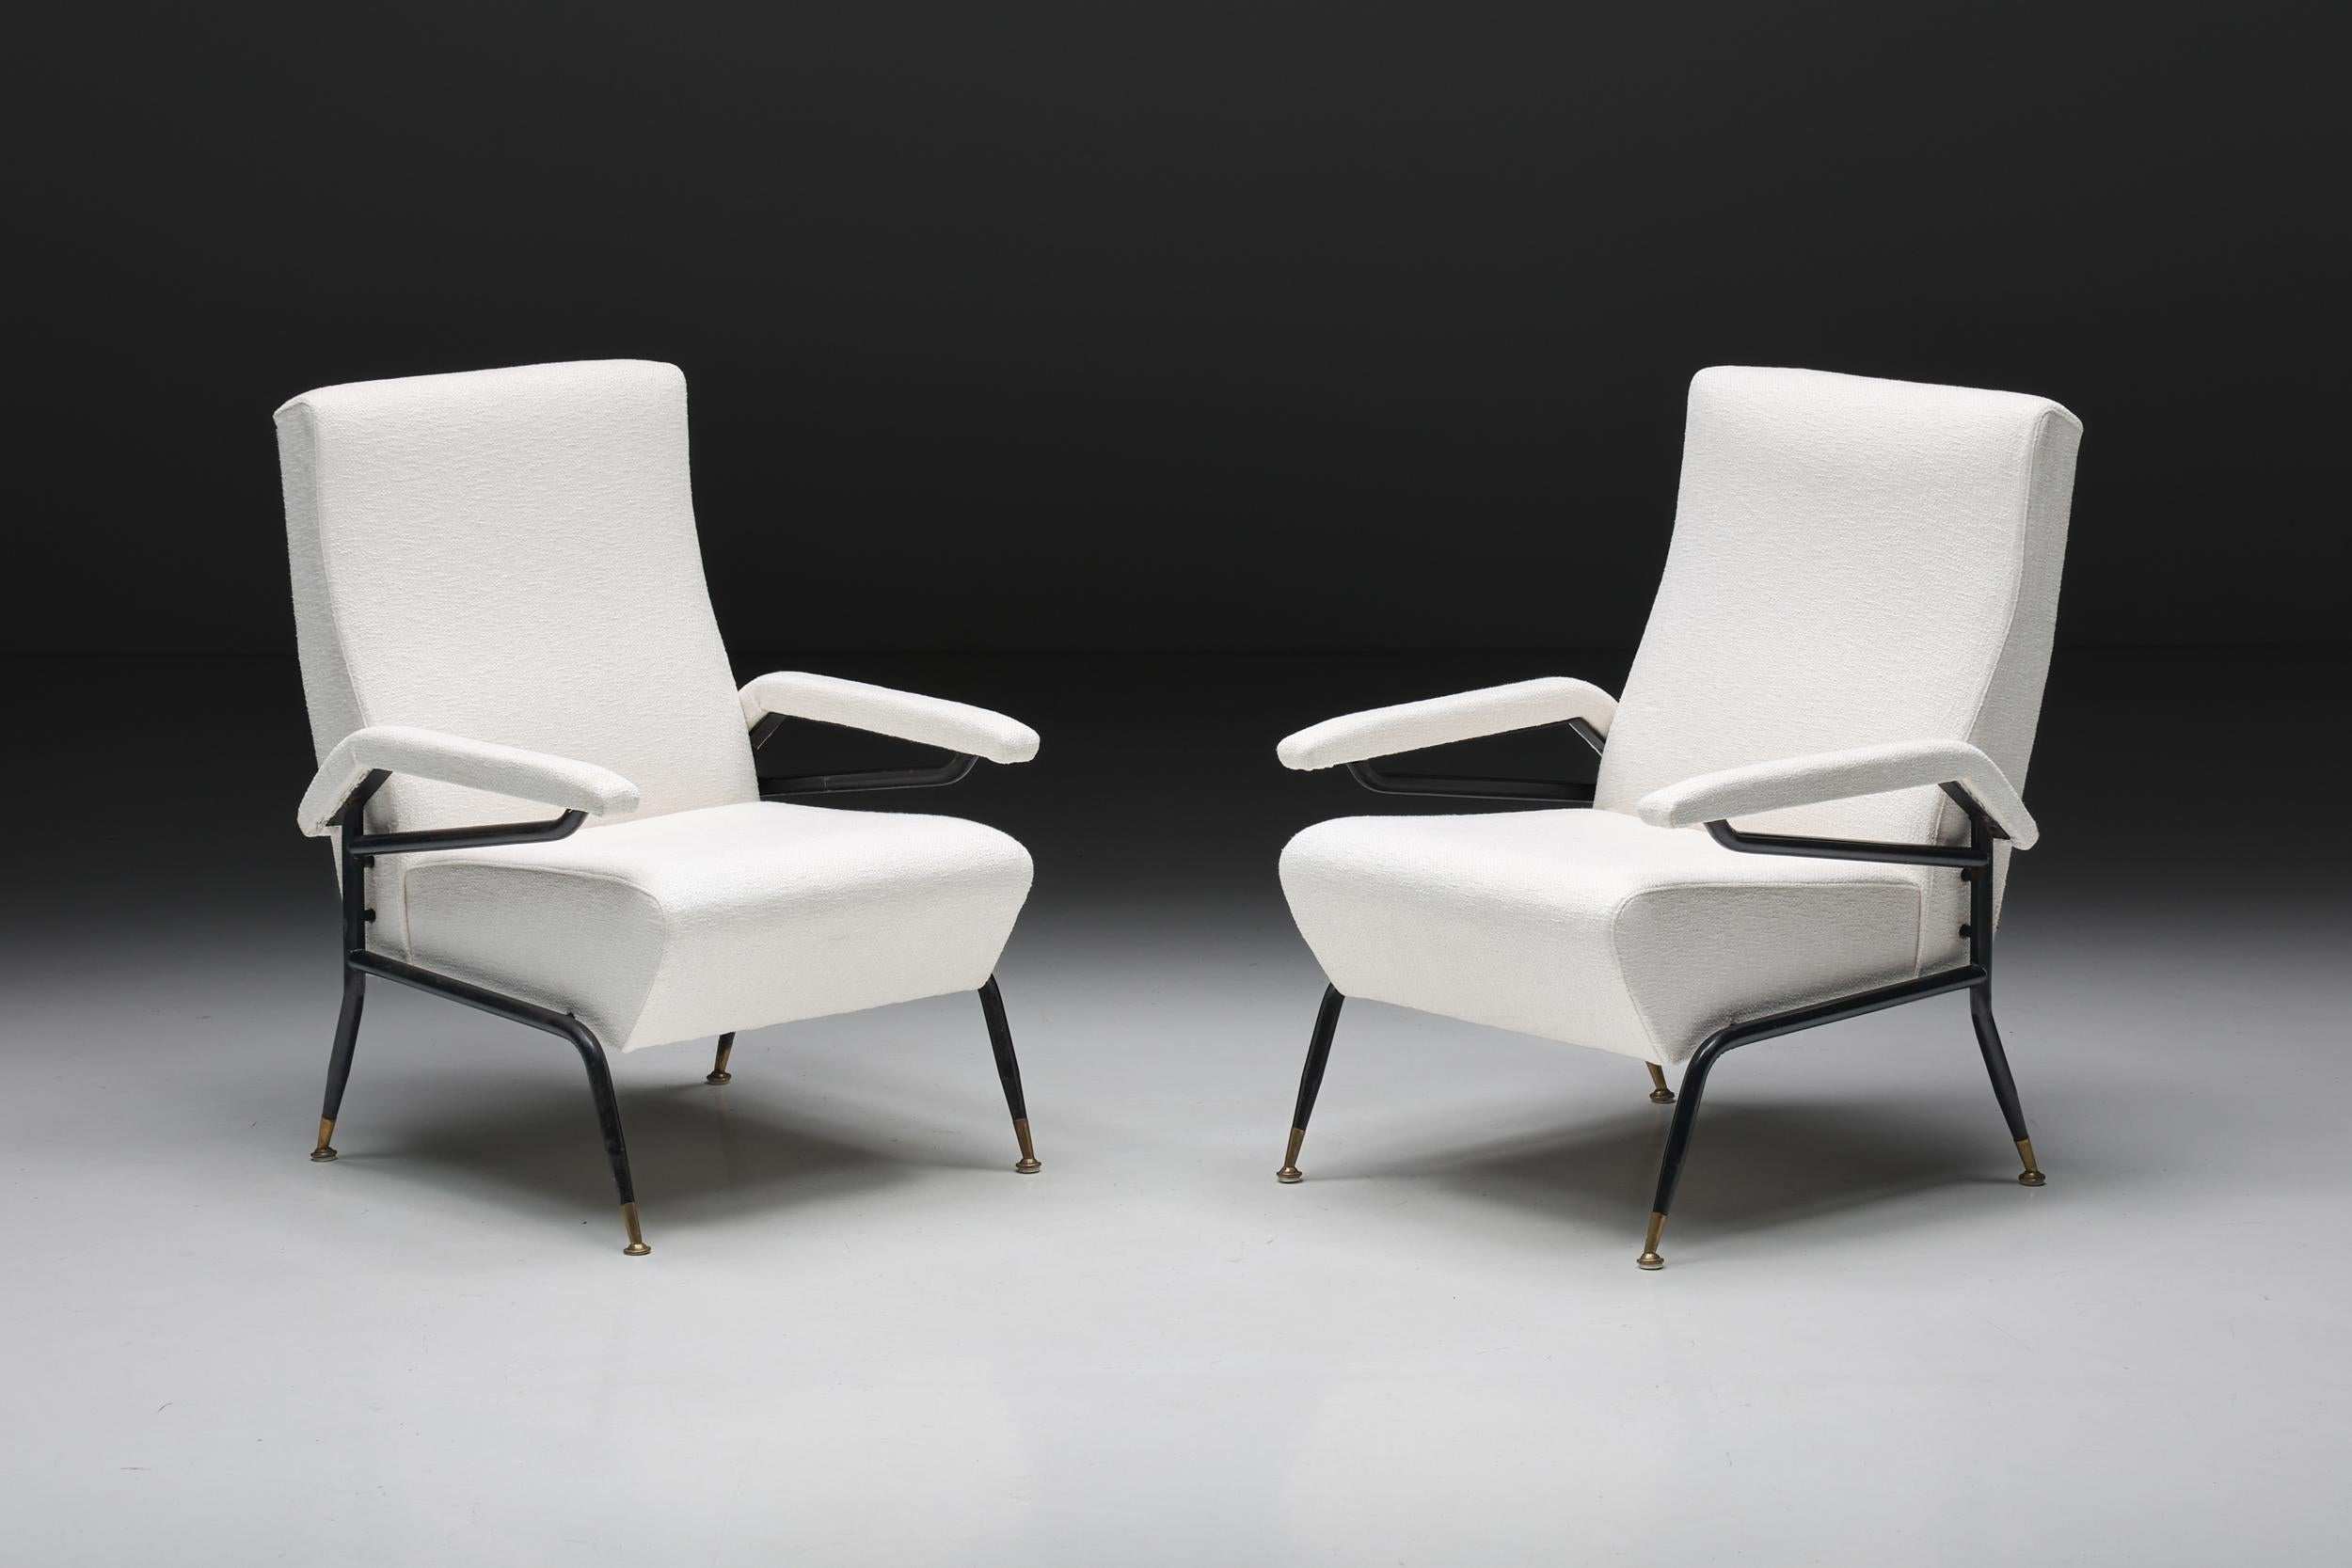 Wim Rietveld; Armchairs; Lounge Chairs; Off-White Upholstery; Fabric; Modern; Minimal; Minimalist; Metal Frame; Chairs; Living Room Set; Italy; Italian Design; 1970s; Italy; Italian Design; Contemporary; 

Wim Rietveld inspired armchairs with a